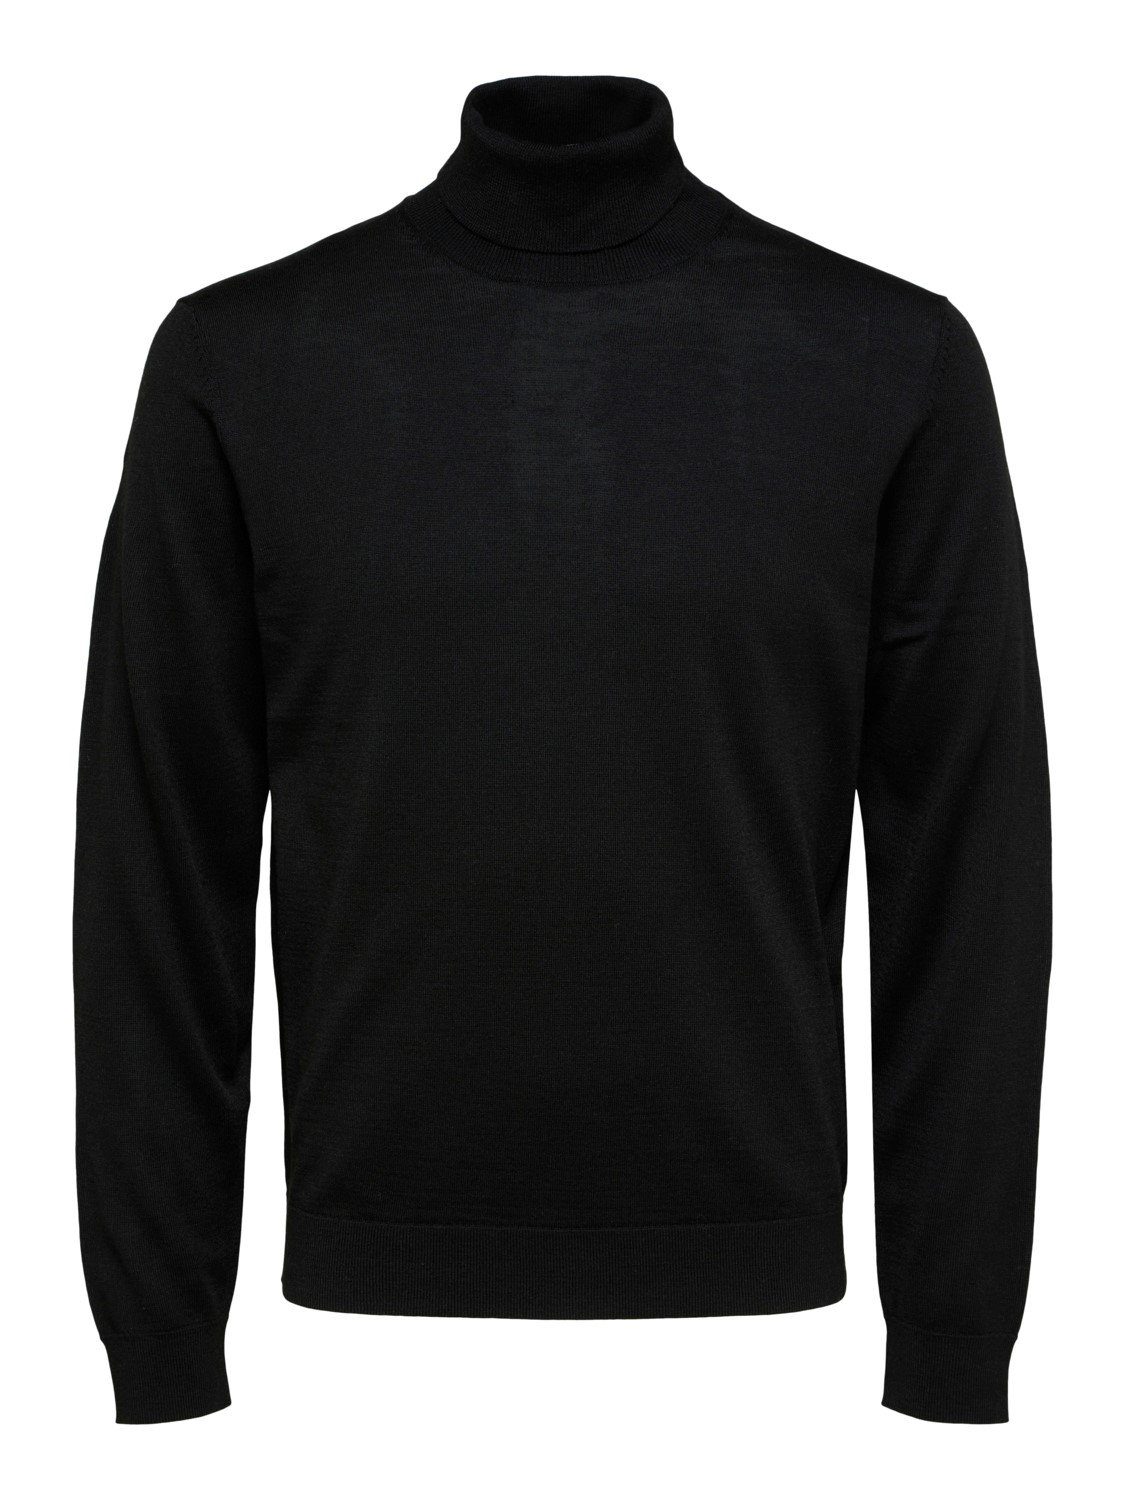 COOLMAX Strickpullover aus SELECTED SLHTOWN Black HOMME 16084840 MERINO Wollmix